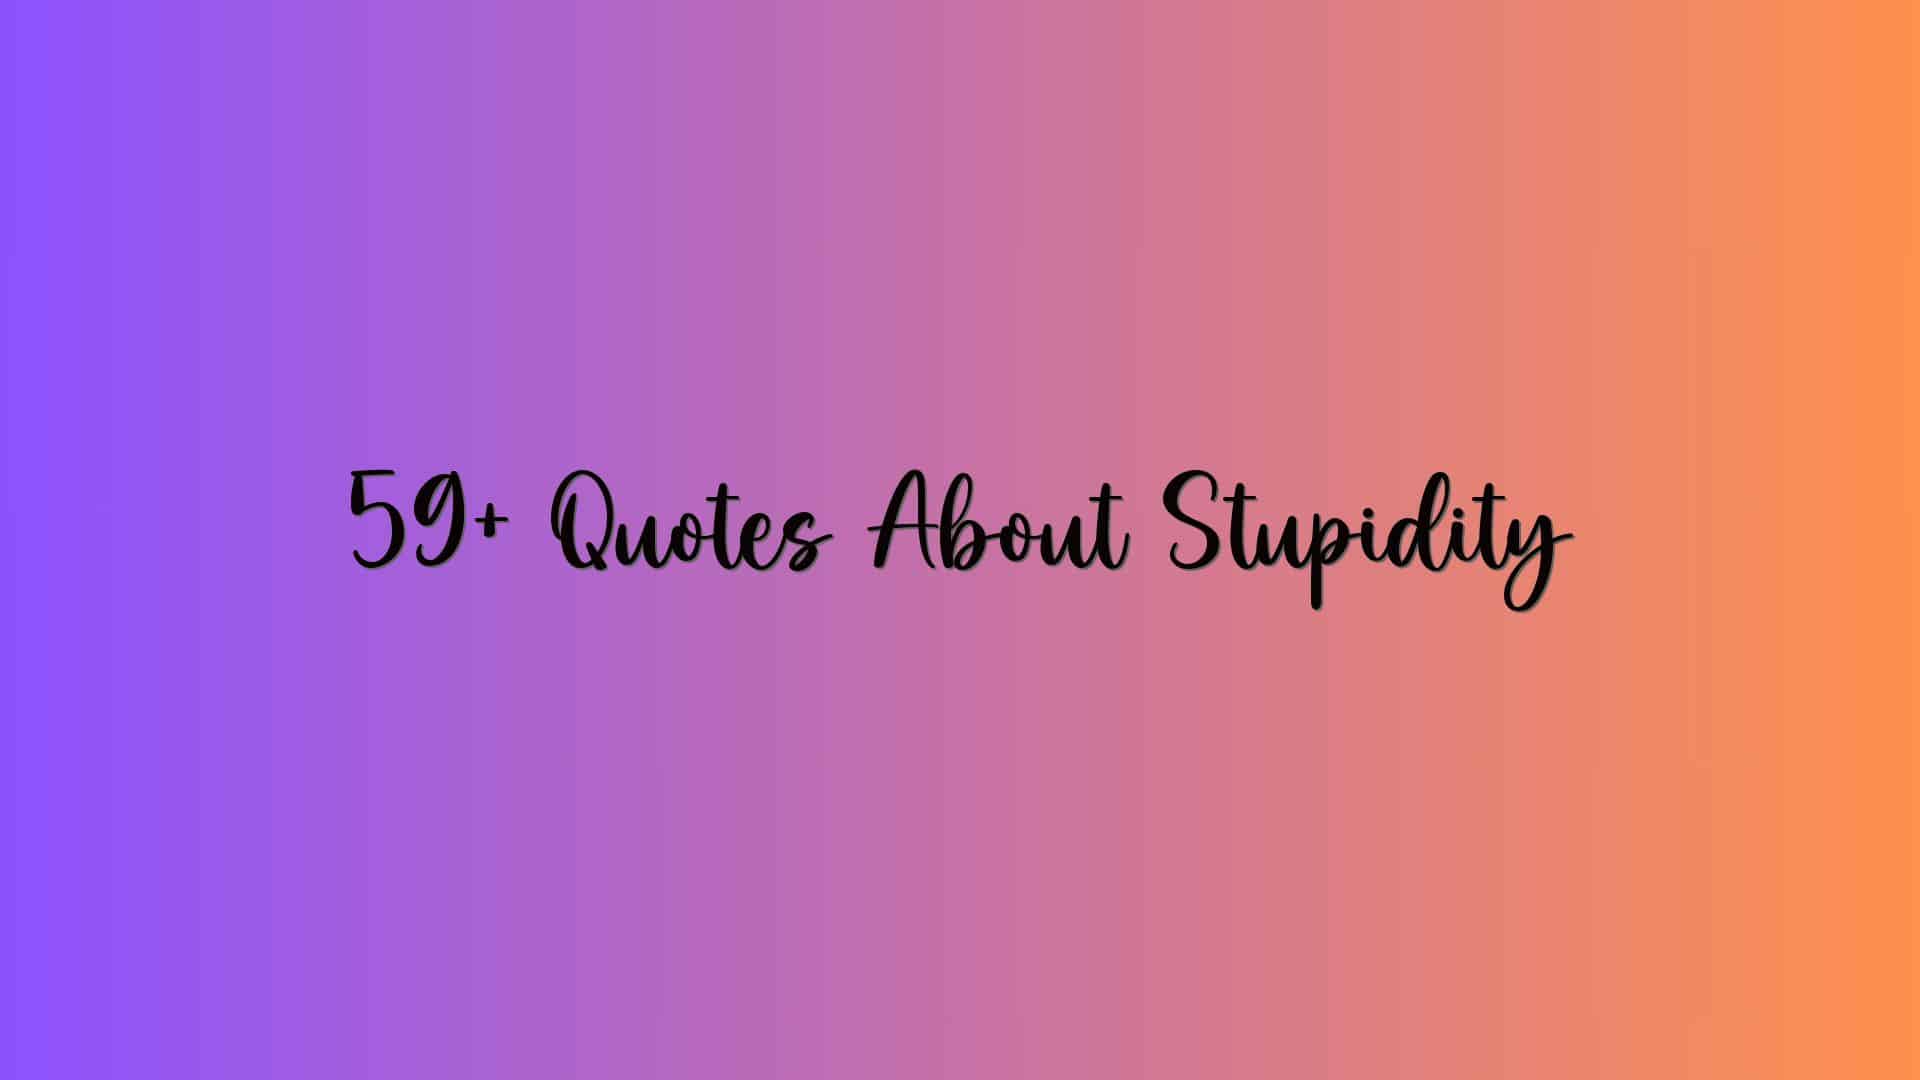 59+ Quotes About Stupidity